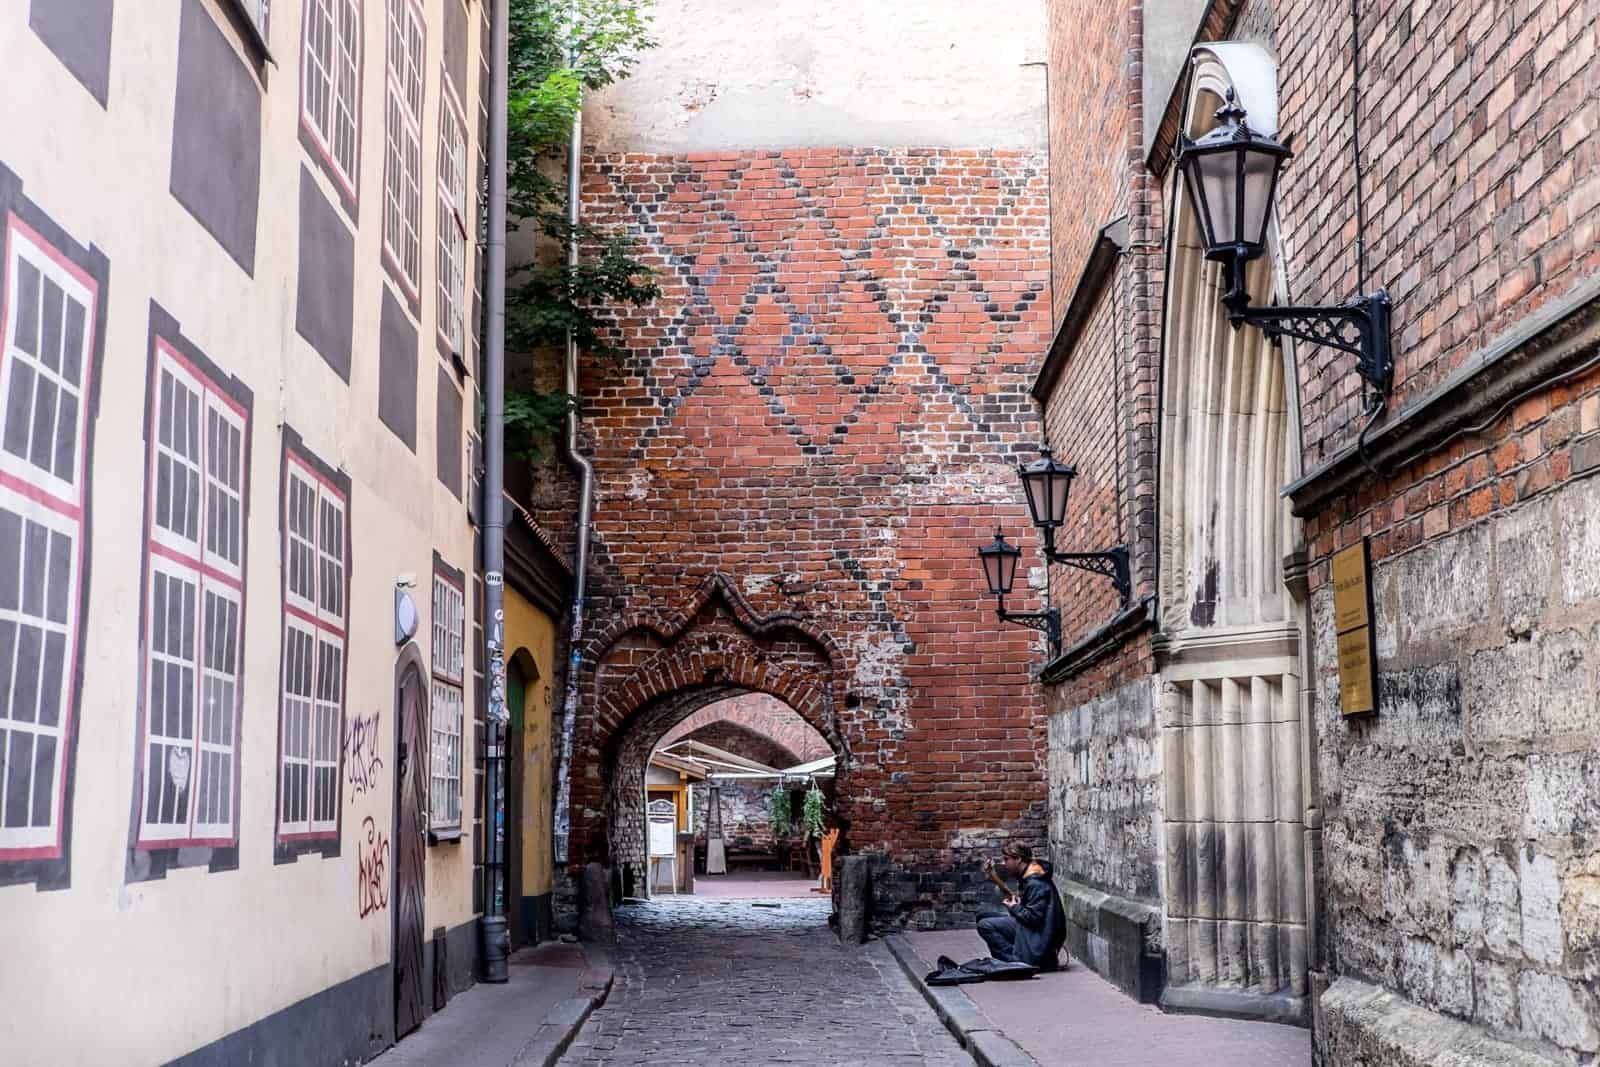 Mediveval architecture and alleyways of Riga Old Town, Latvia